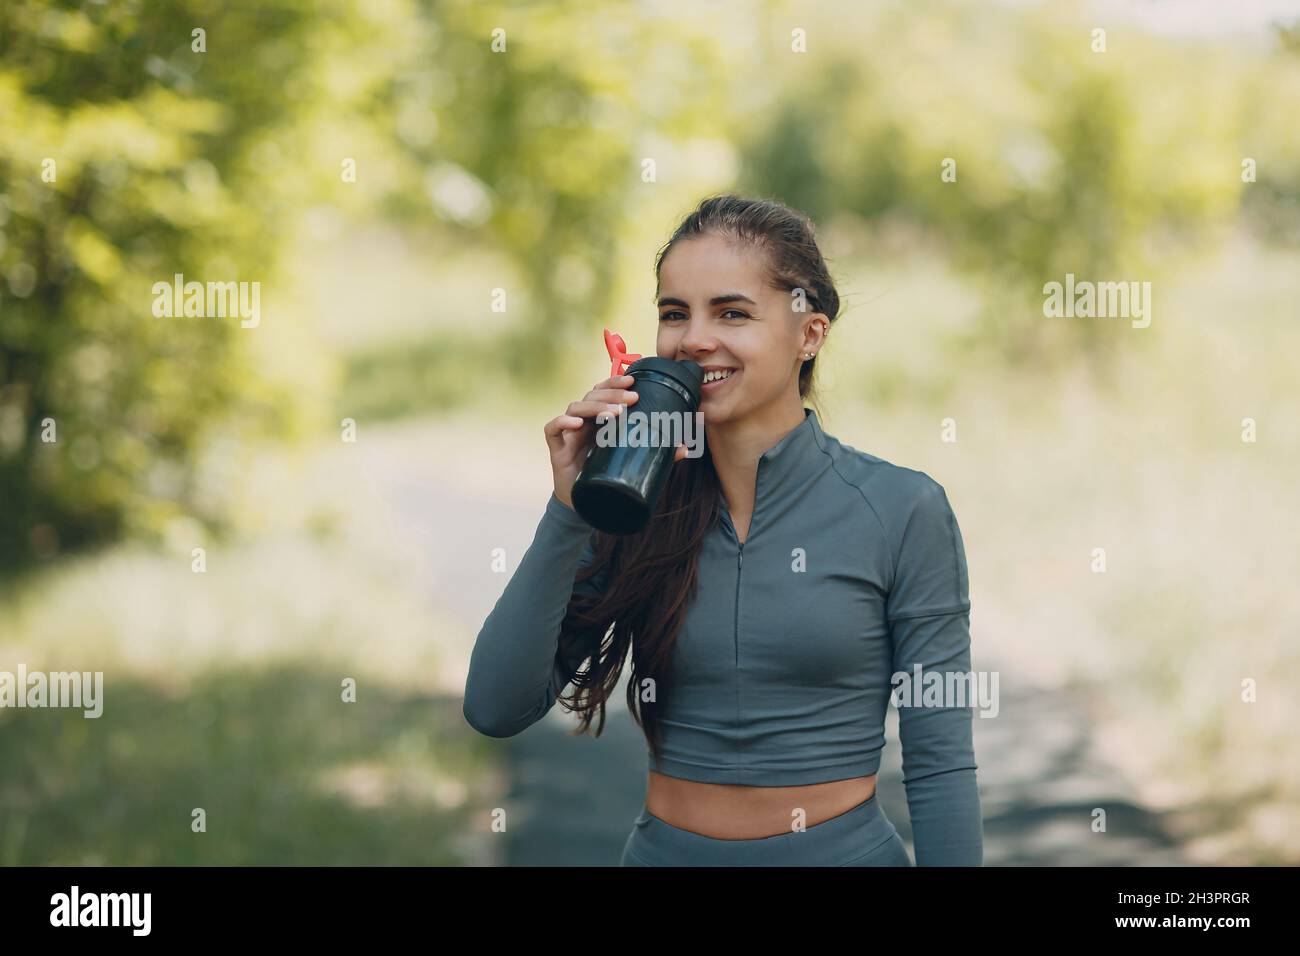 Tired runner woman jogger drinking bottled water after jogging in park outdoor. Stock Photo